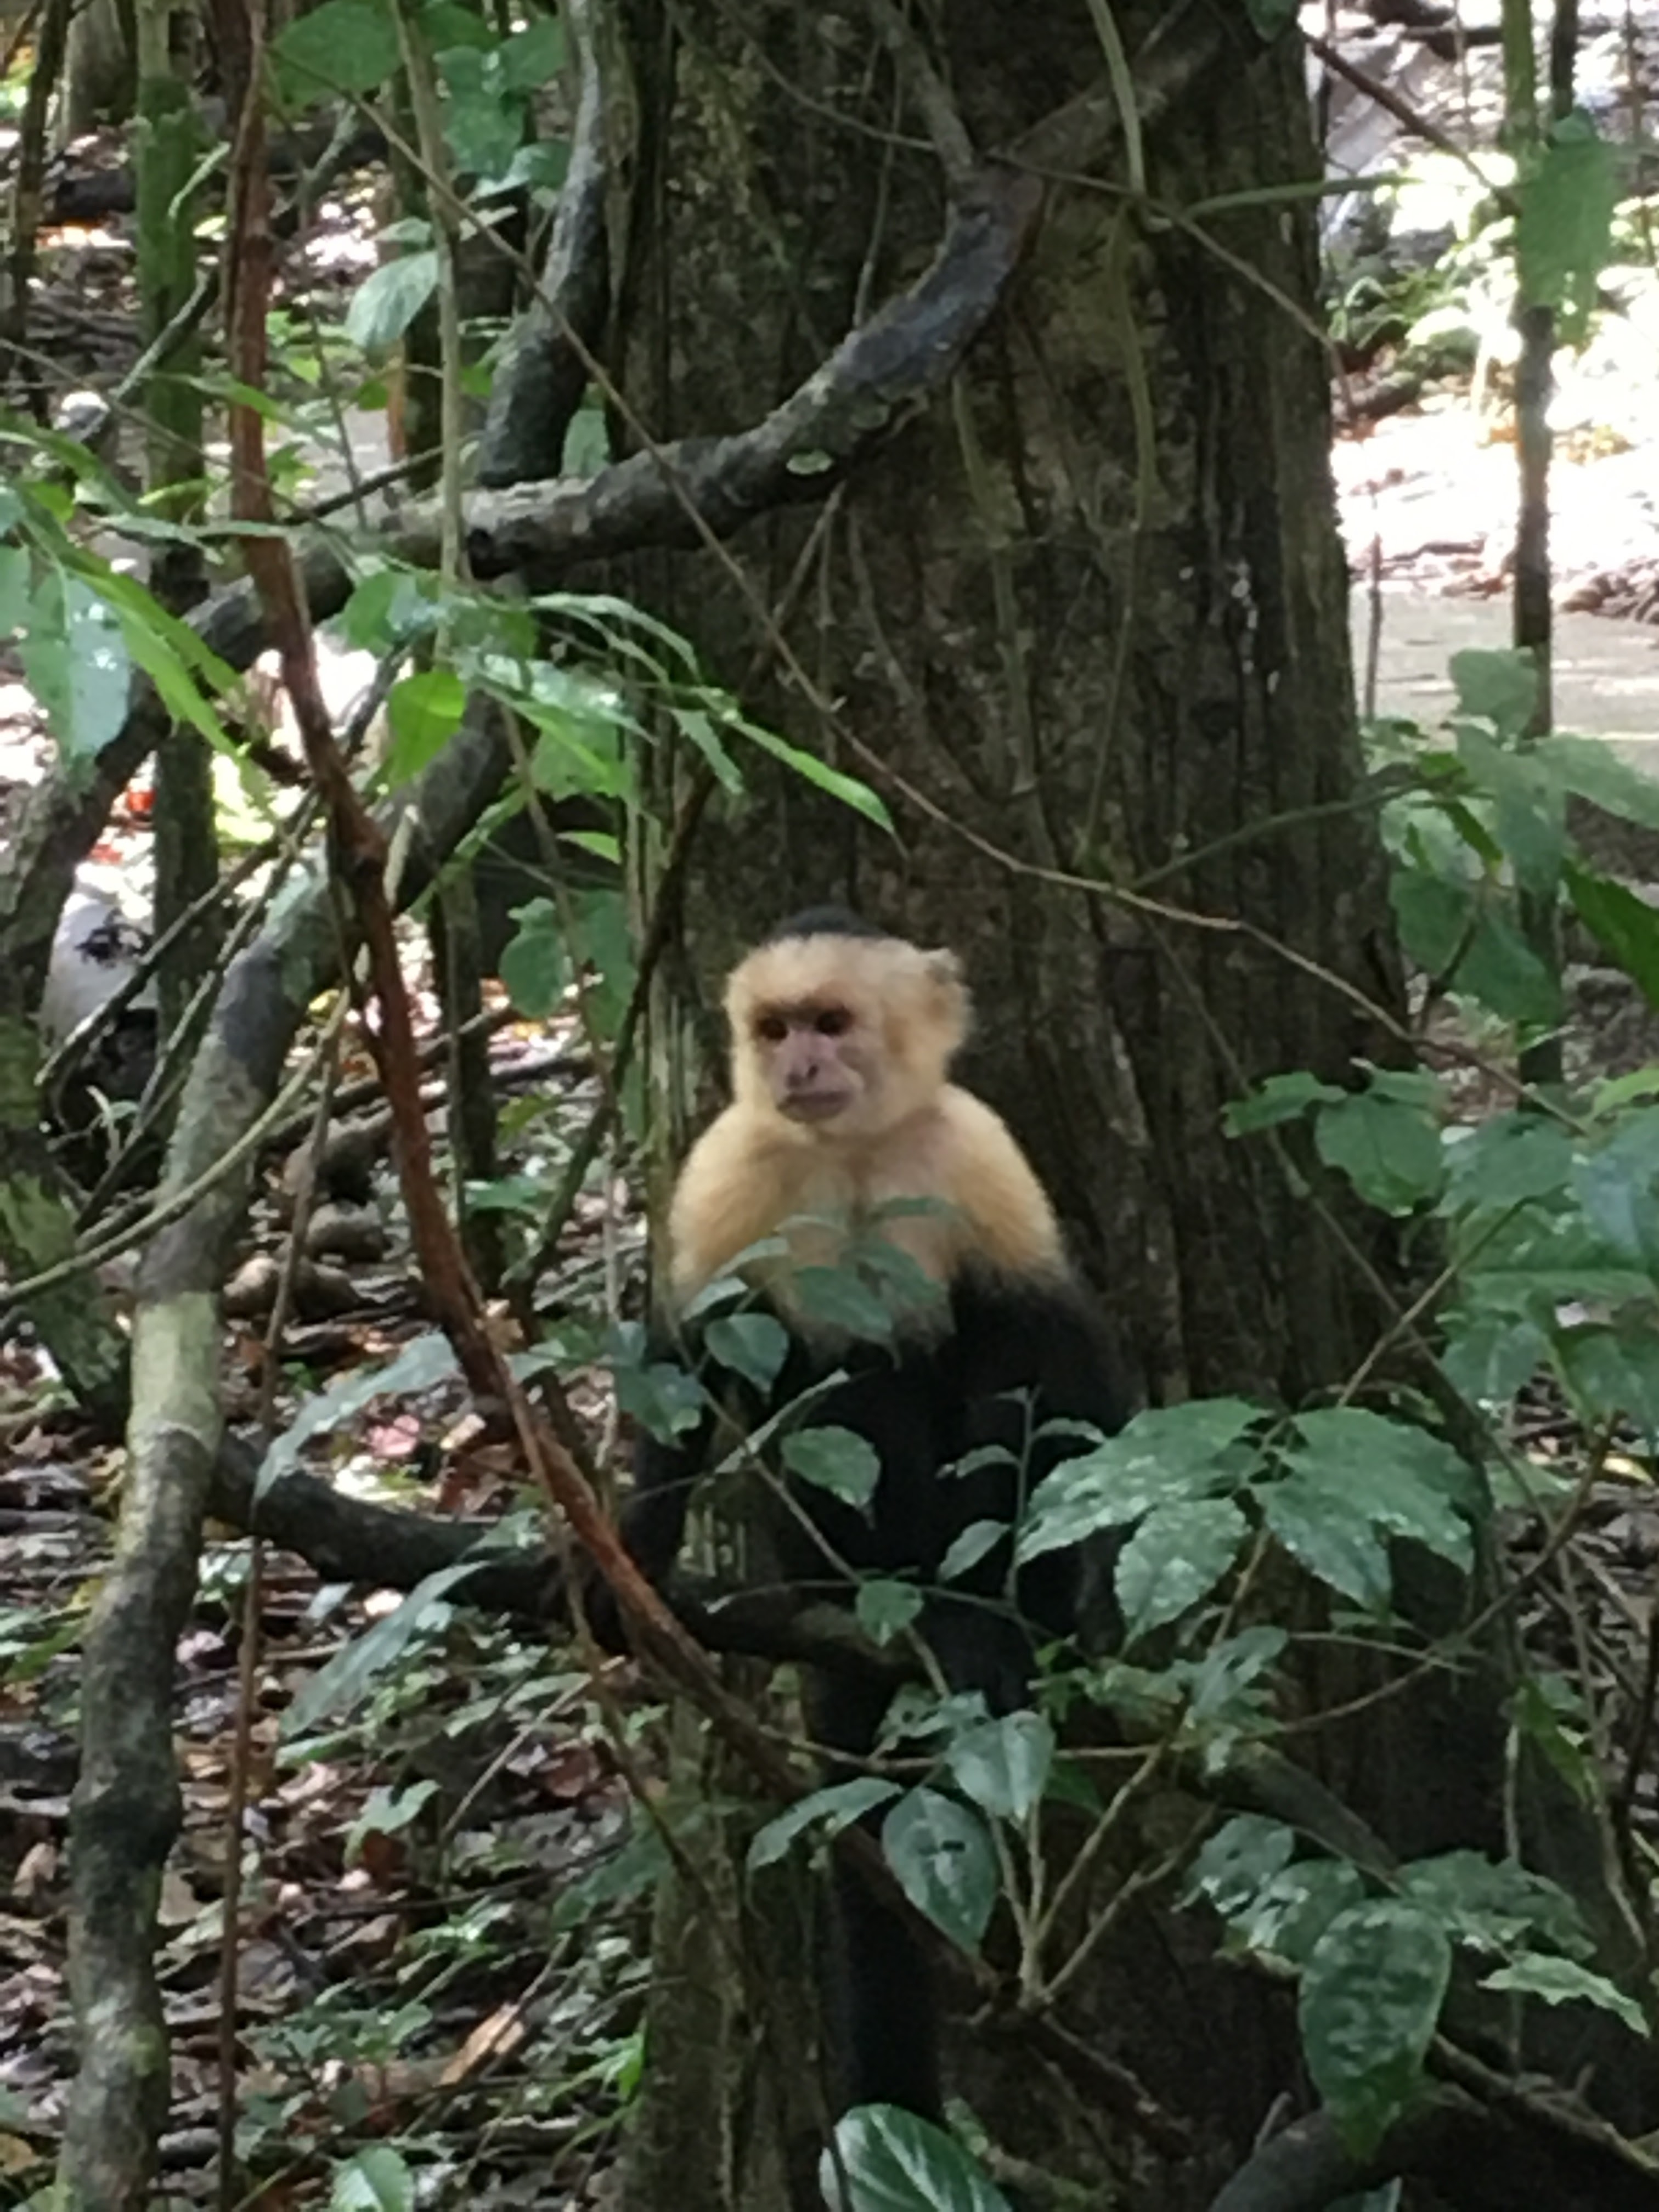 Capuchin monkey - up close and personal in the national park